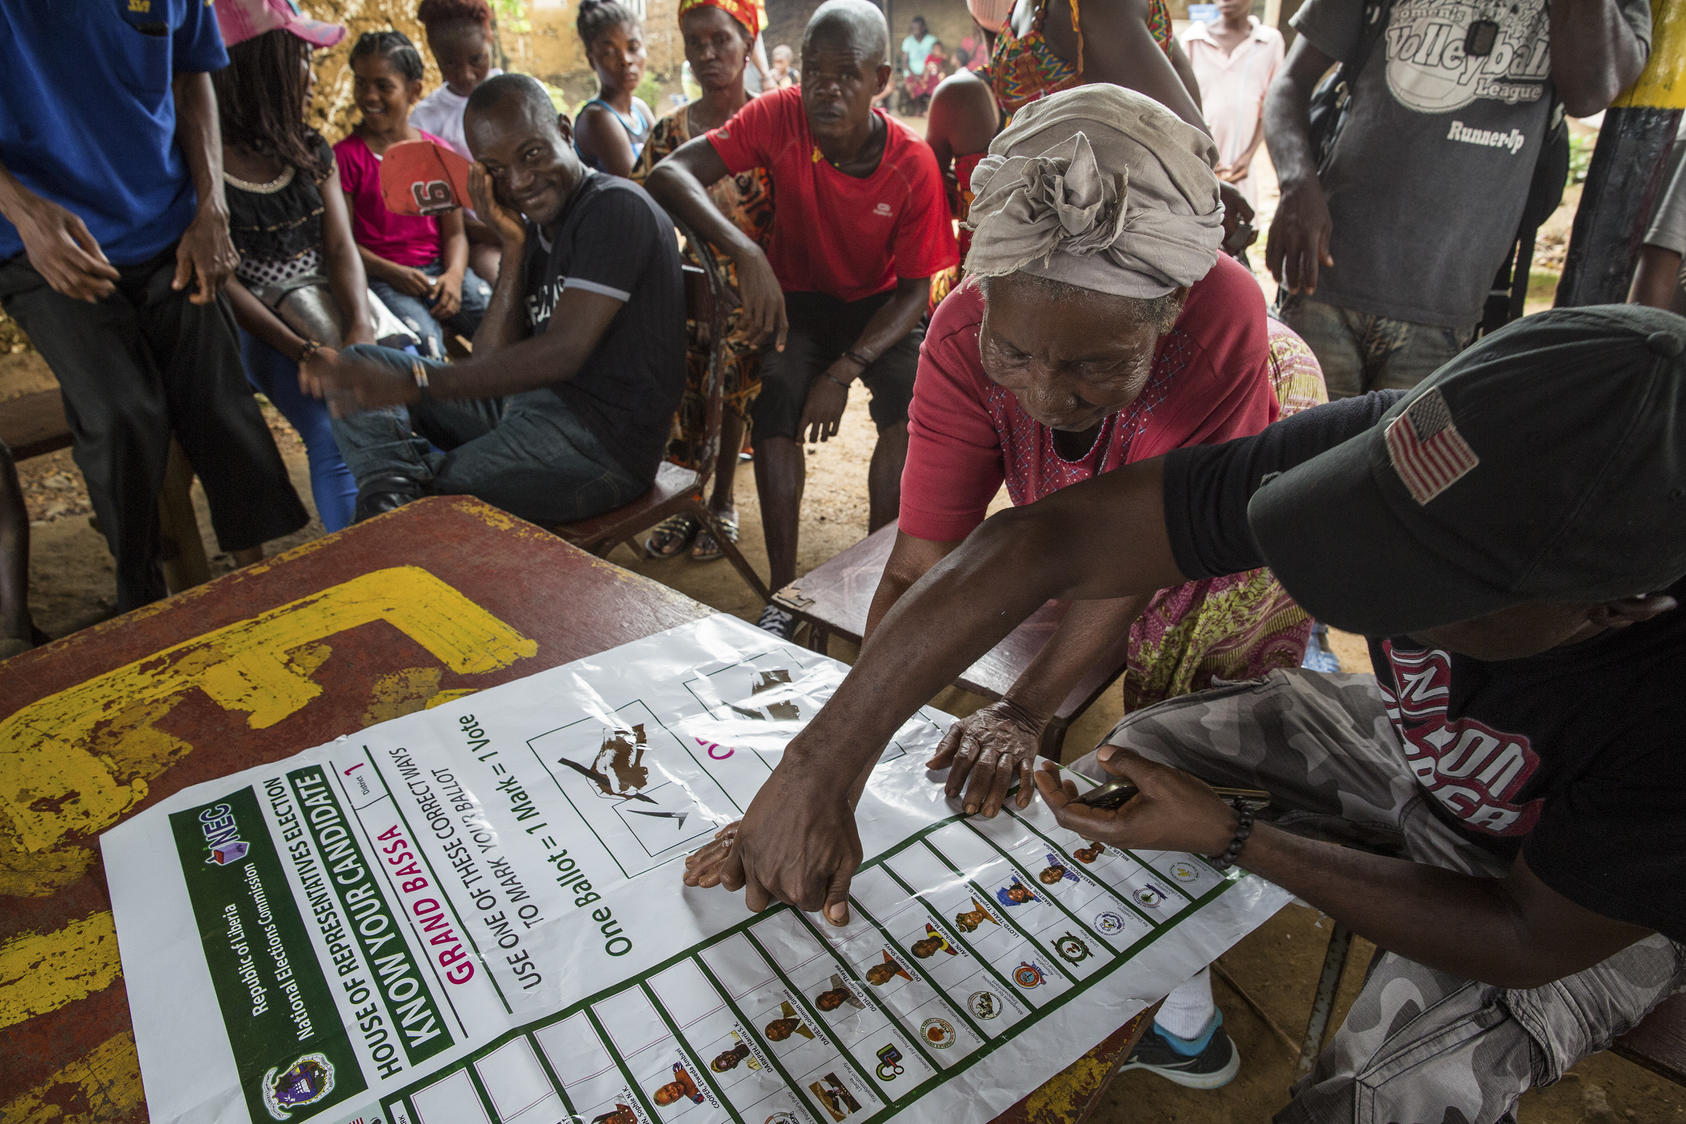 A member of Joseph Duo's campaign team shows a woman where the candidate's name will appear on the ballot in District One of Grand Bassa County, Liberia, Sept. 28, 2017. Duo, a onetime child soldier who returned to high school, studied criminal justice at a university and, among various other pursuits, once trained police officers, decided at the age of 40 to run for a seat in Liberia's legislature. (Carielle Doe/The New York Times) -- PART OF A COLLECTION OF STAND-ALONE PHOTOS FOR USE AS DESIRED IN YEAREND